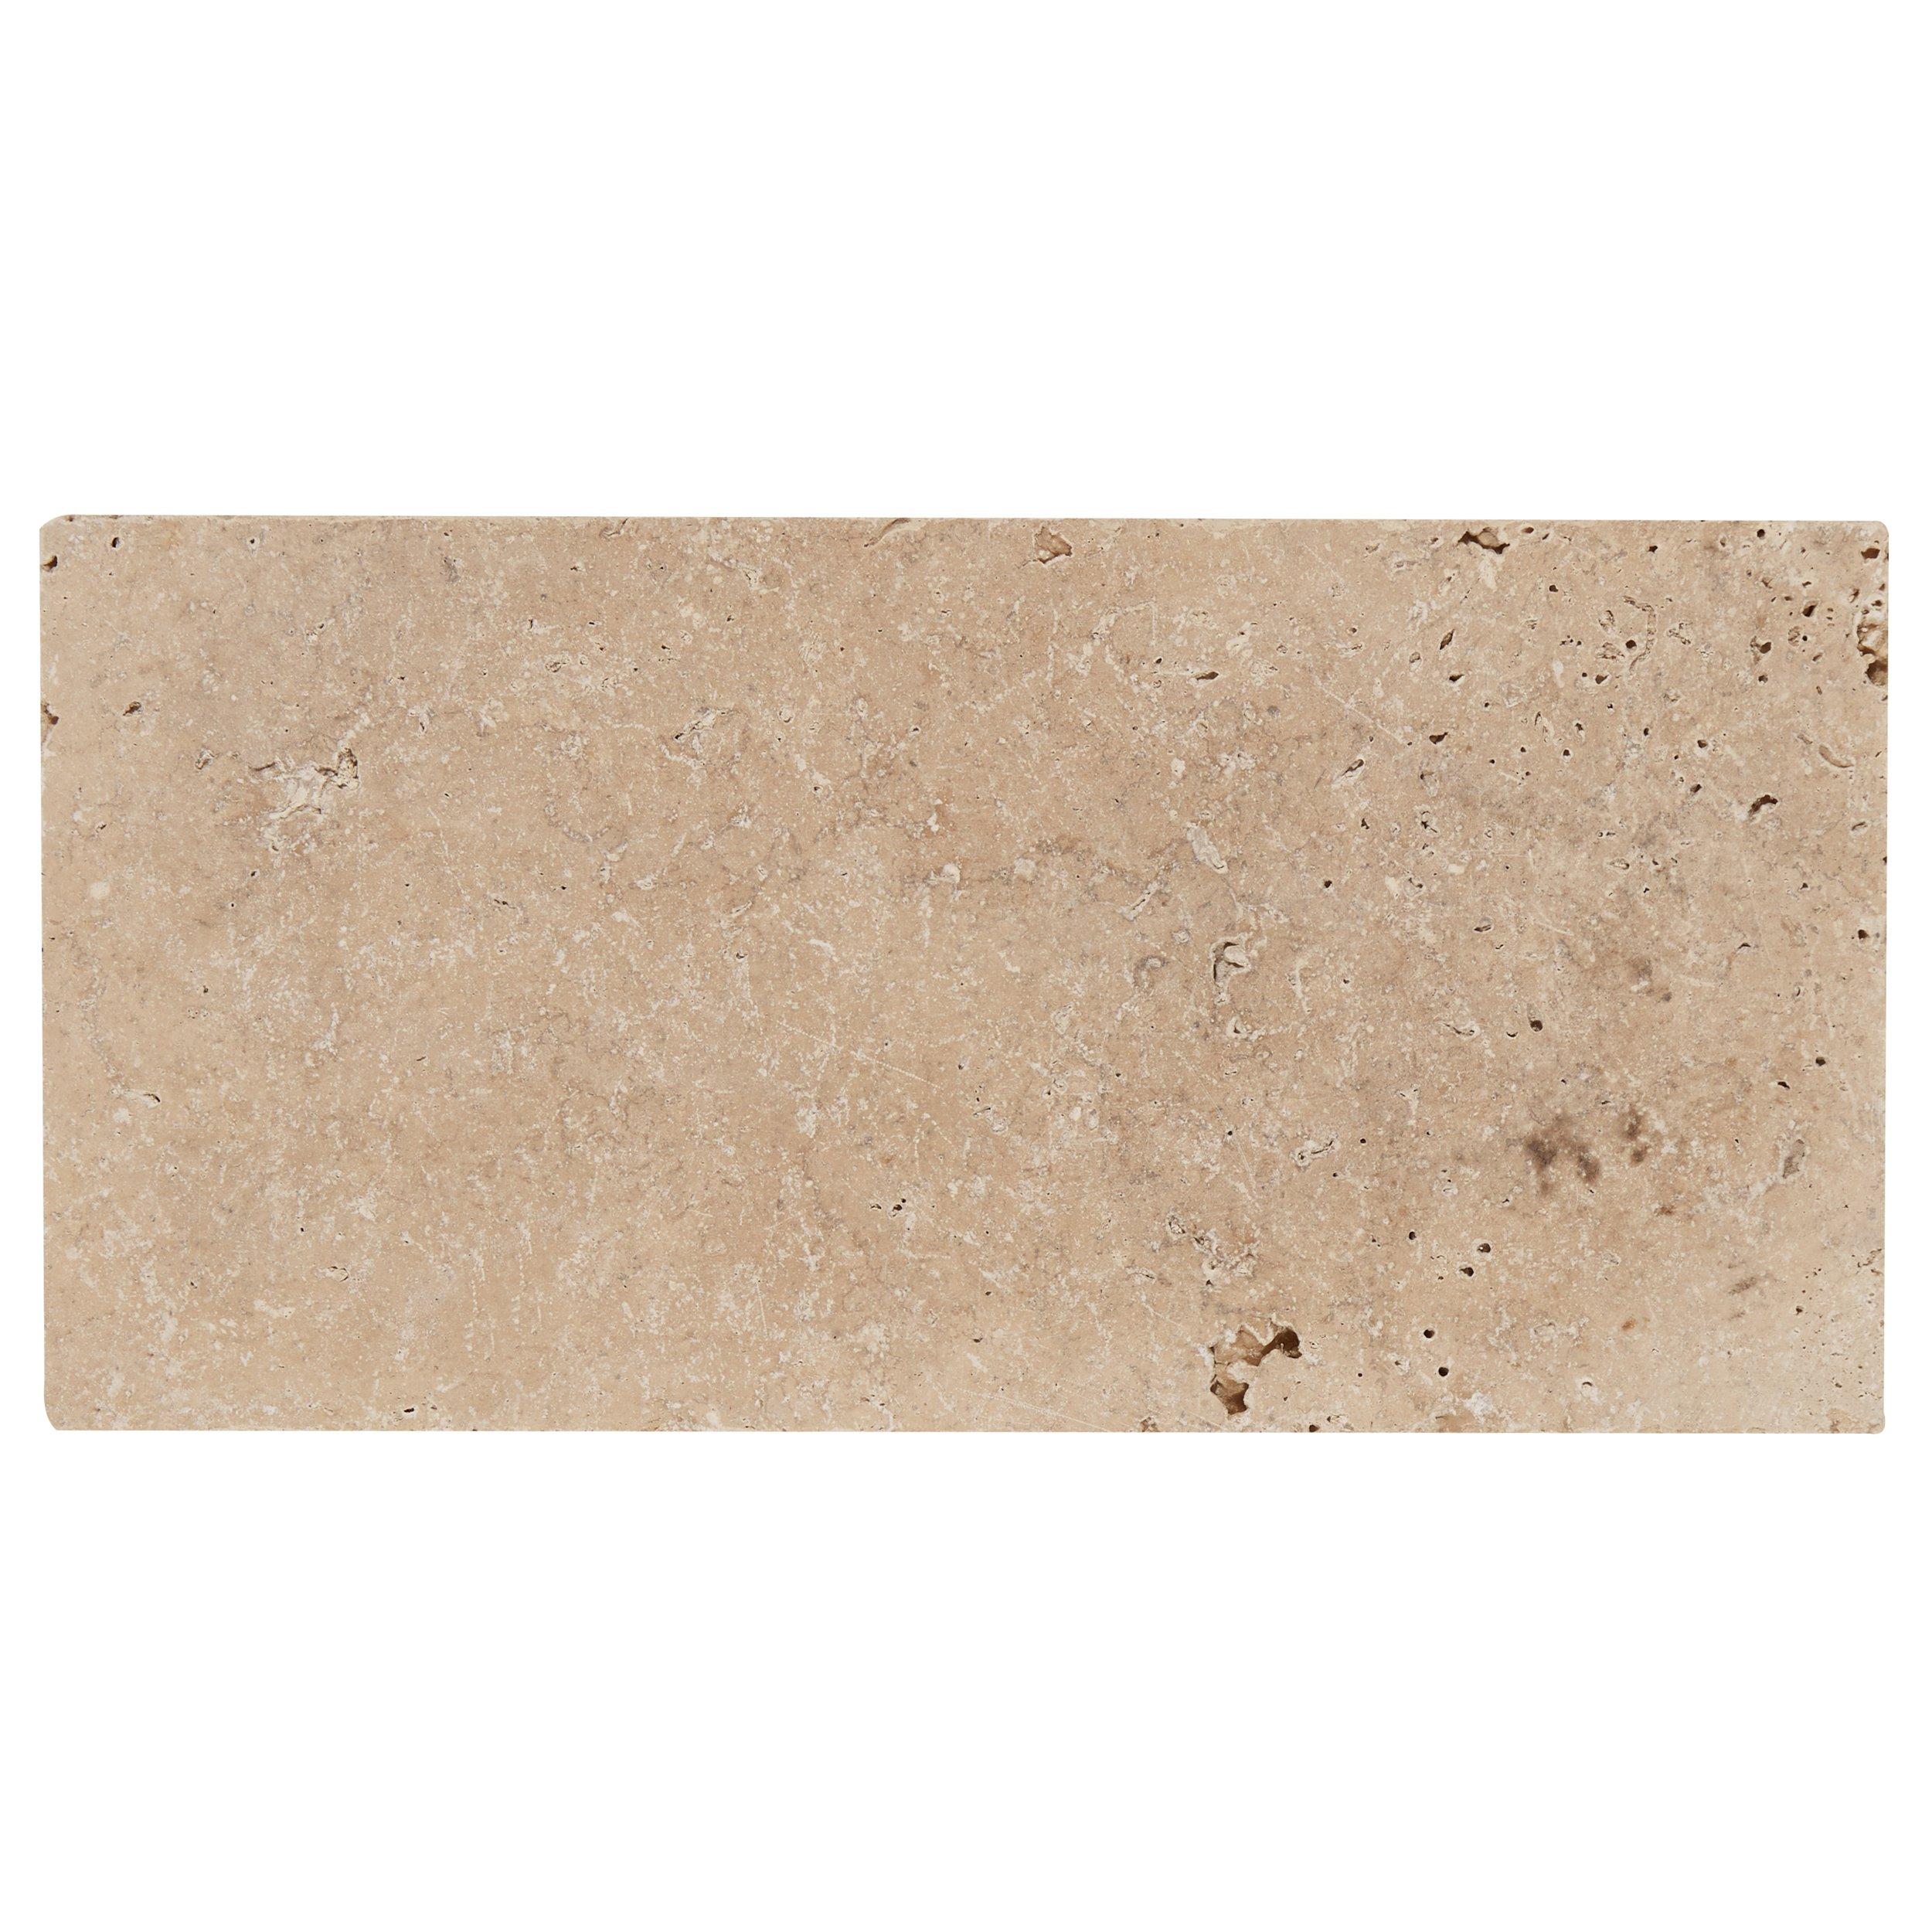 Country Beige Tumbled Travertine Paver Tile